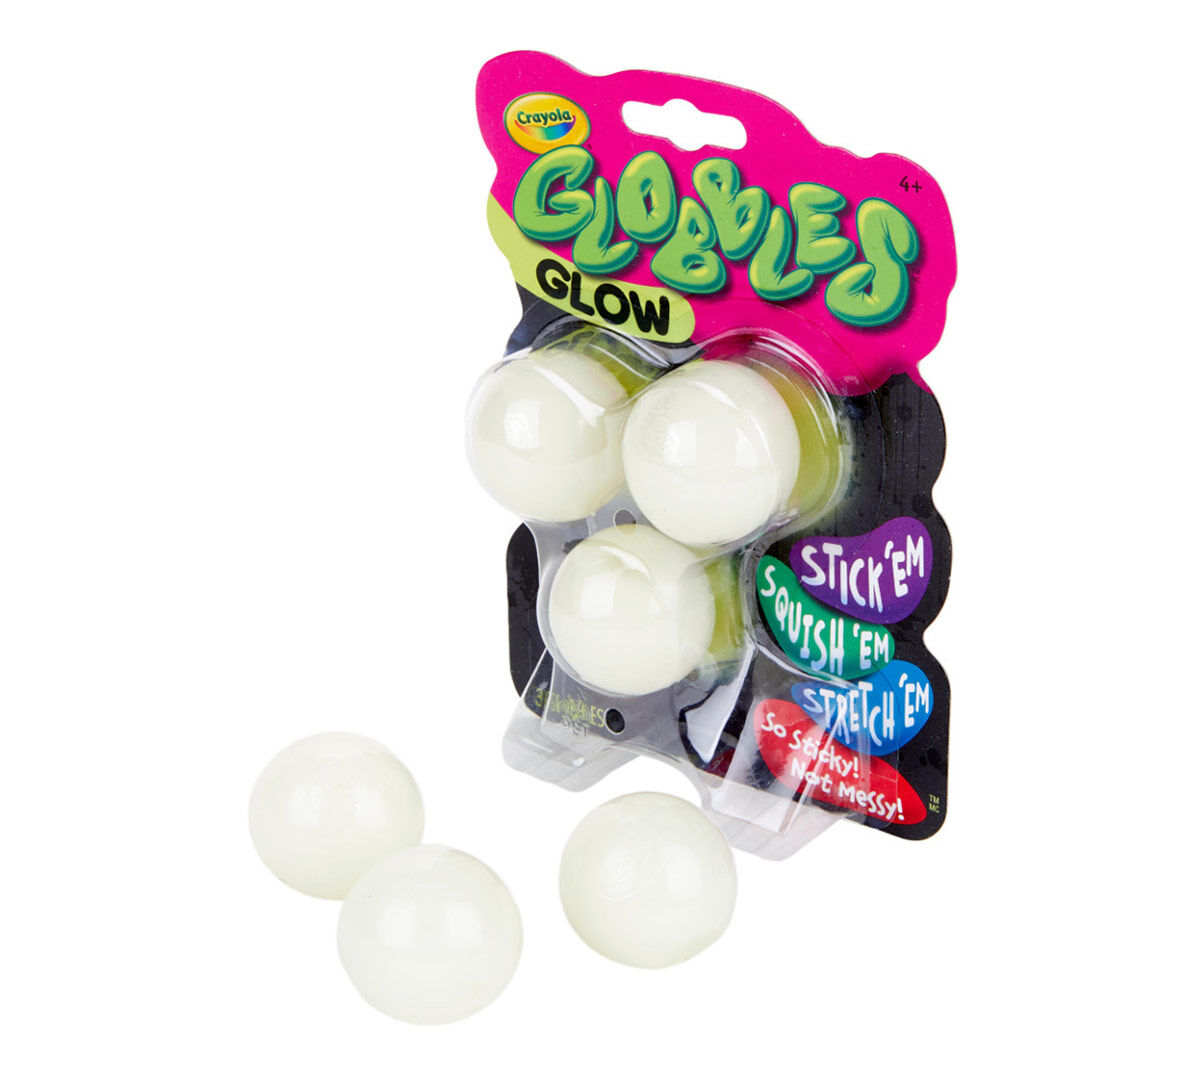 Details about   4PC Crayola Globbles Tiktok New Colors Balls Glow Toy Ball < FREE SHIP 